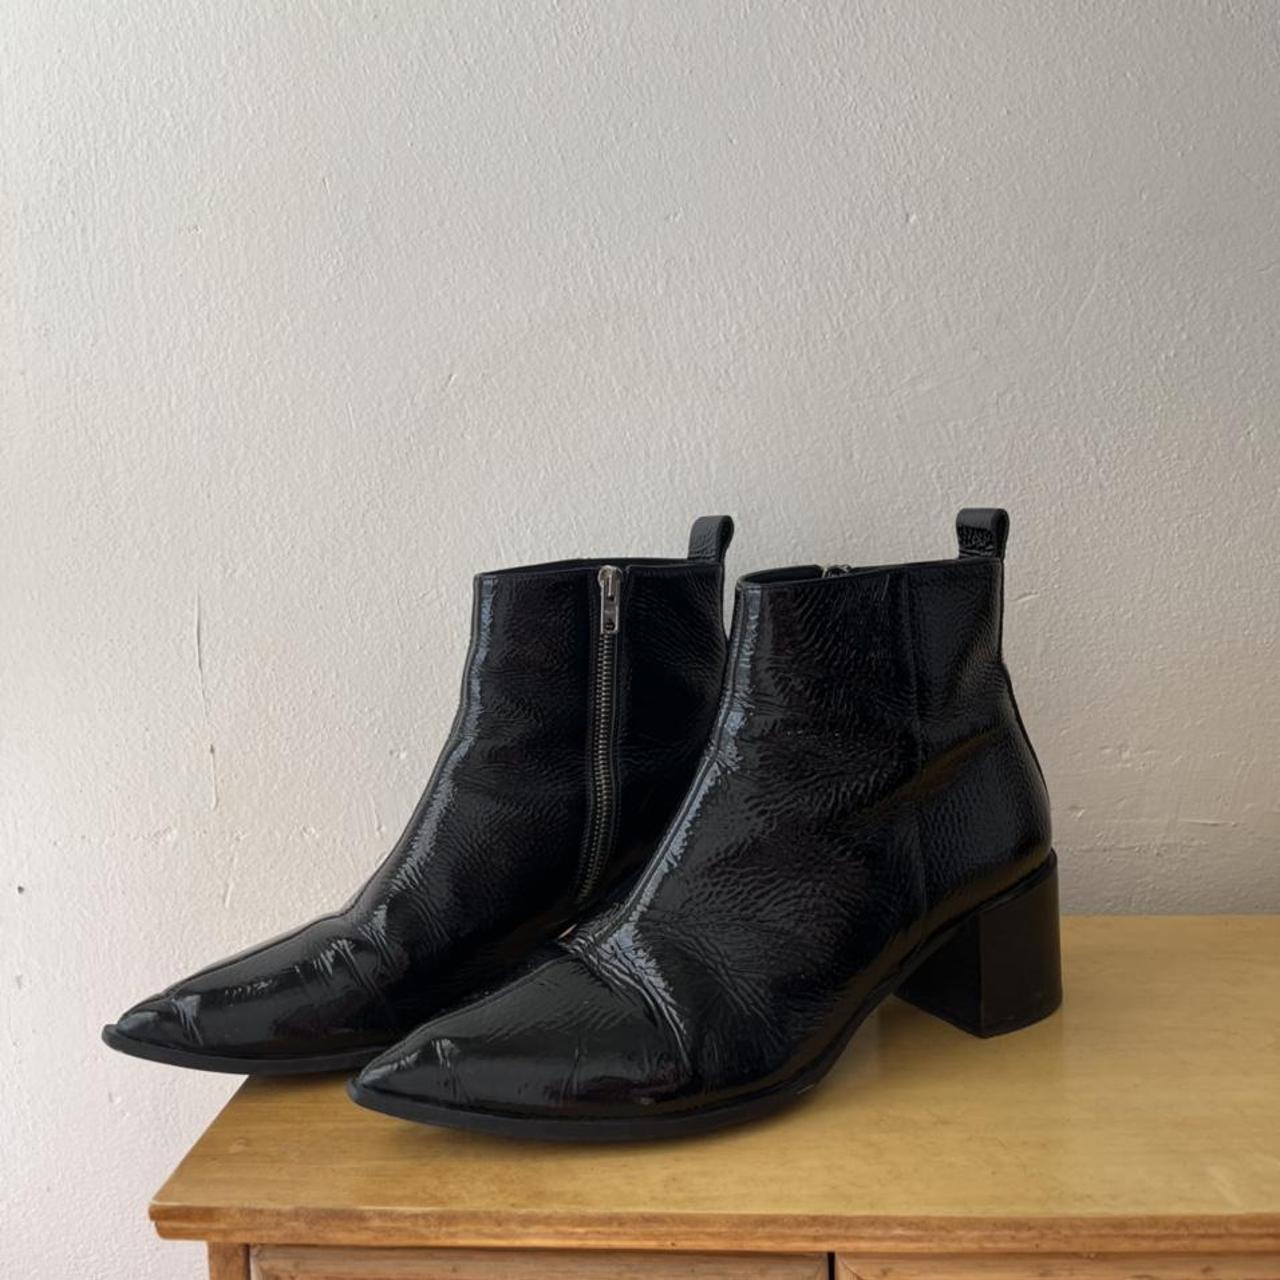 Everlane Women's Black and Silver Boots | Depop